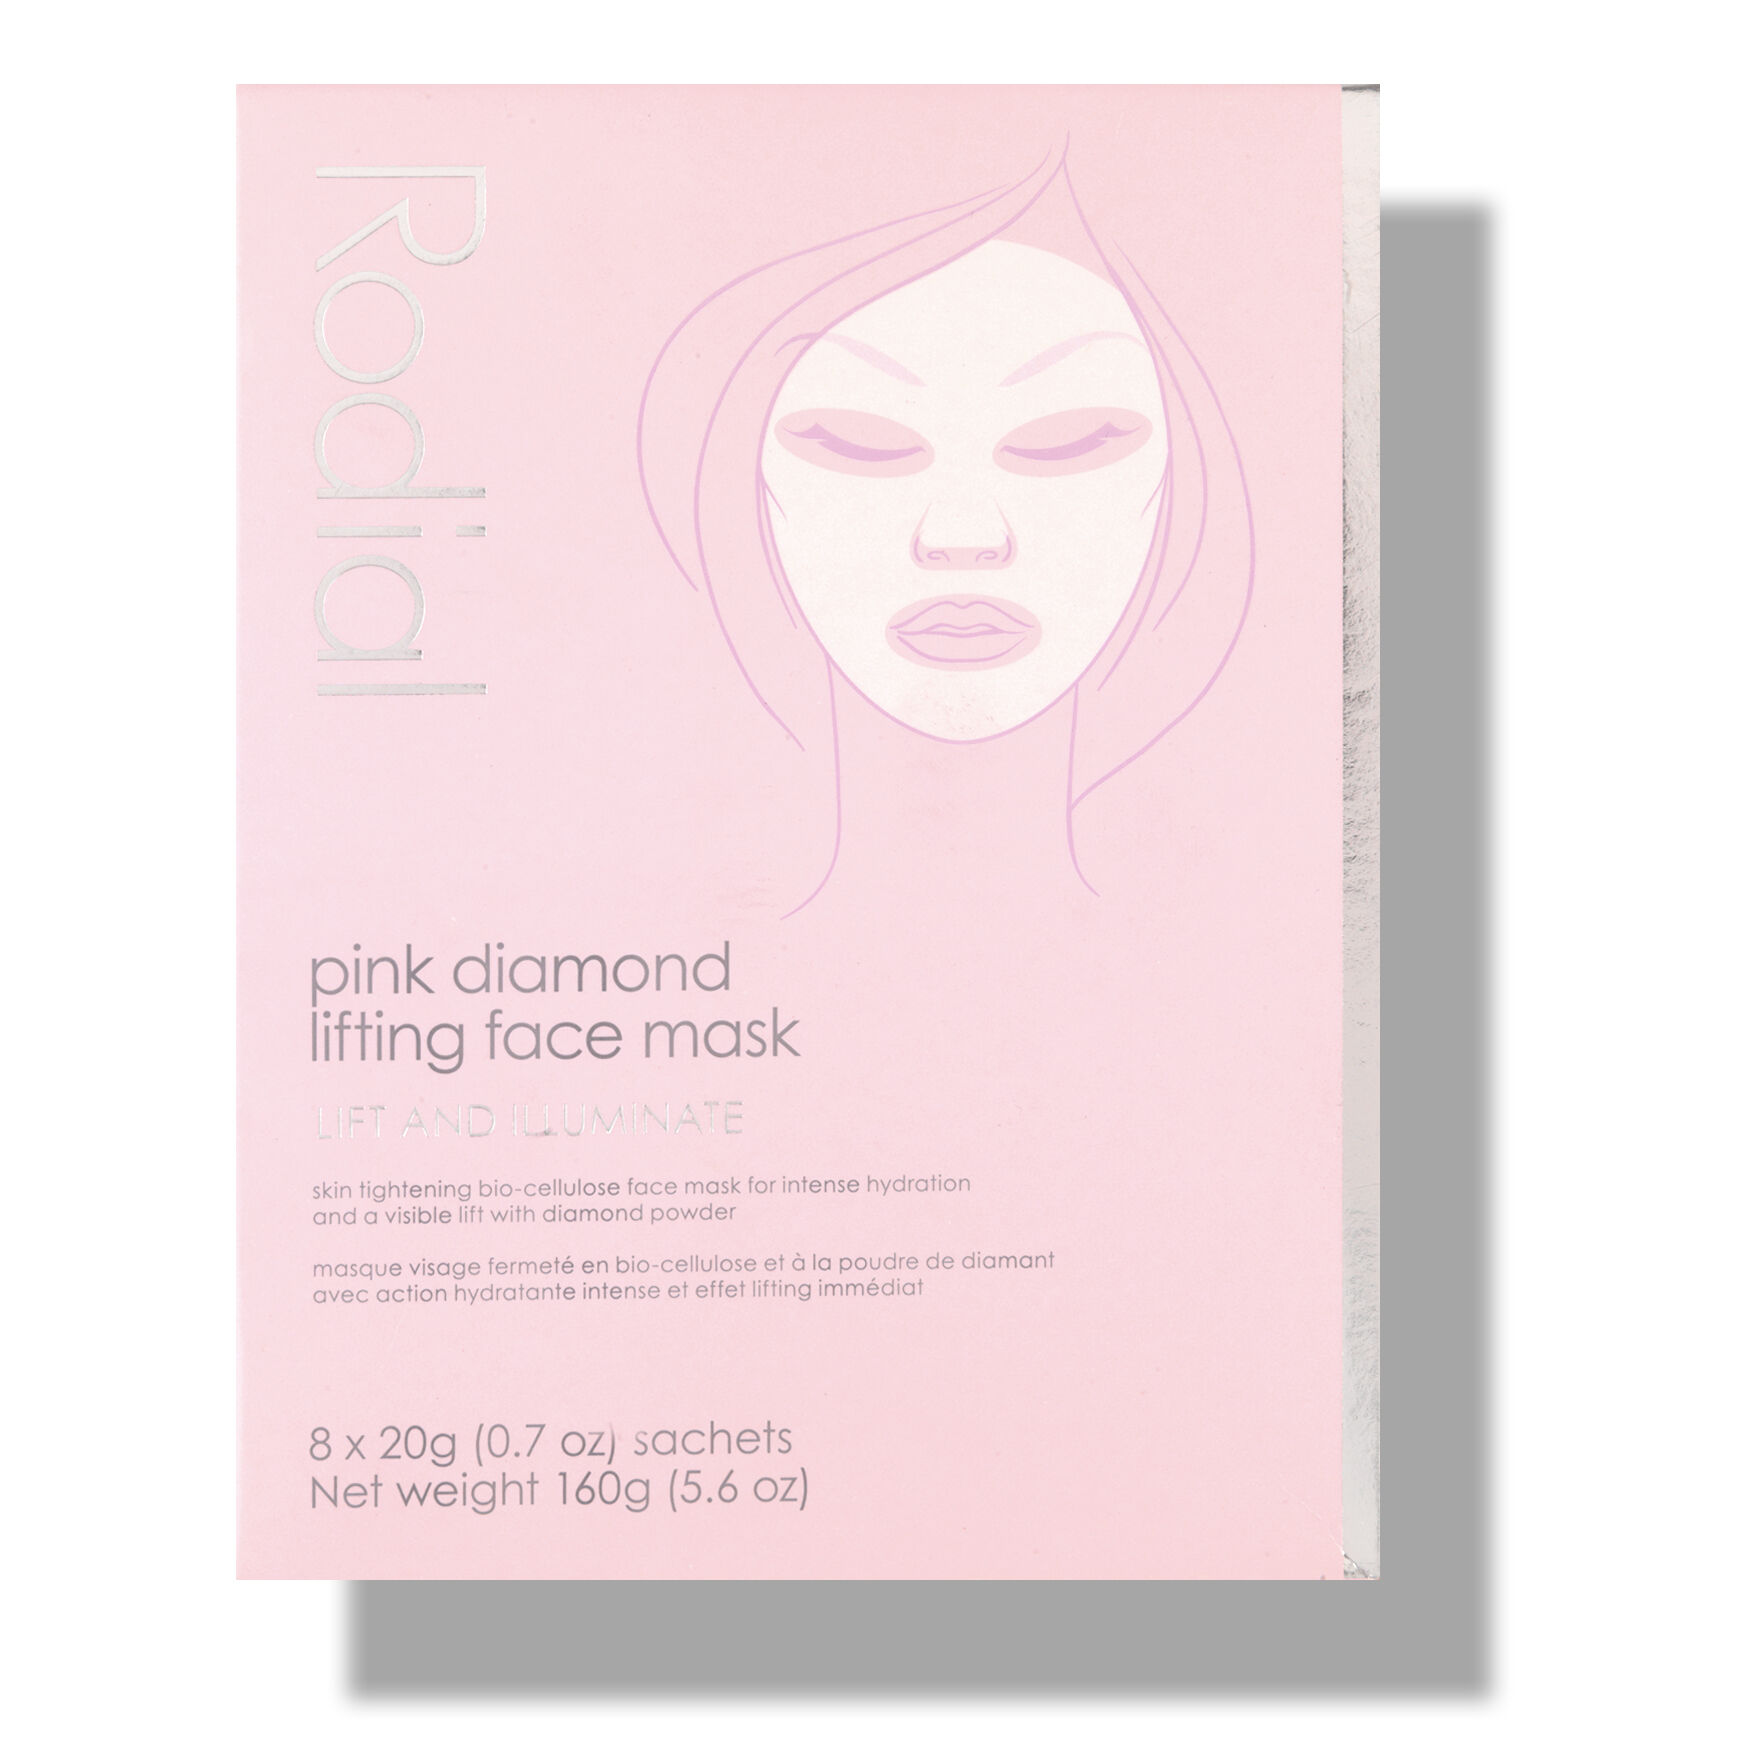 Rodial - Pink Diamond Lifting Face Mask by Rodial